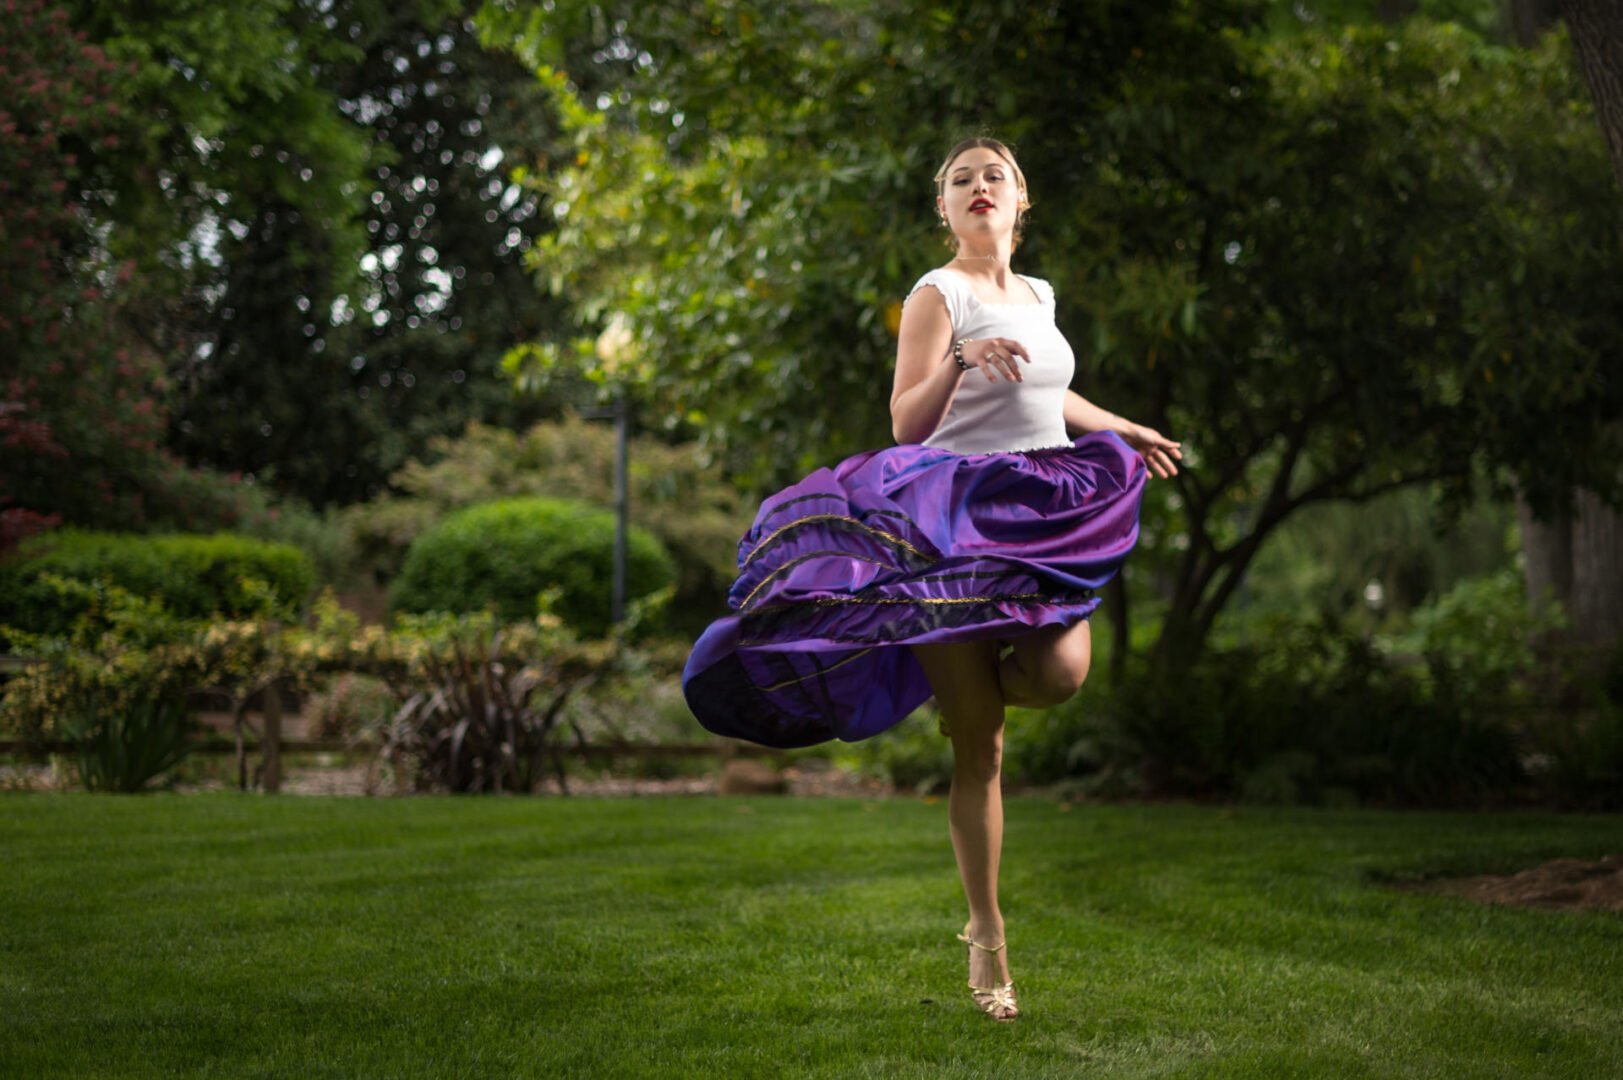 Dancer Susana Correa-Avila Robb wears a white top and purple skirts as she performs and poses on campus.